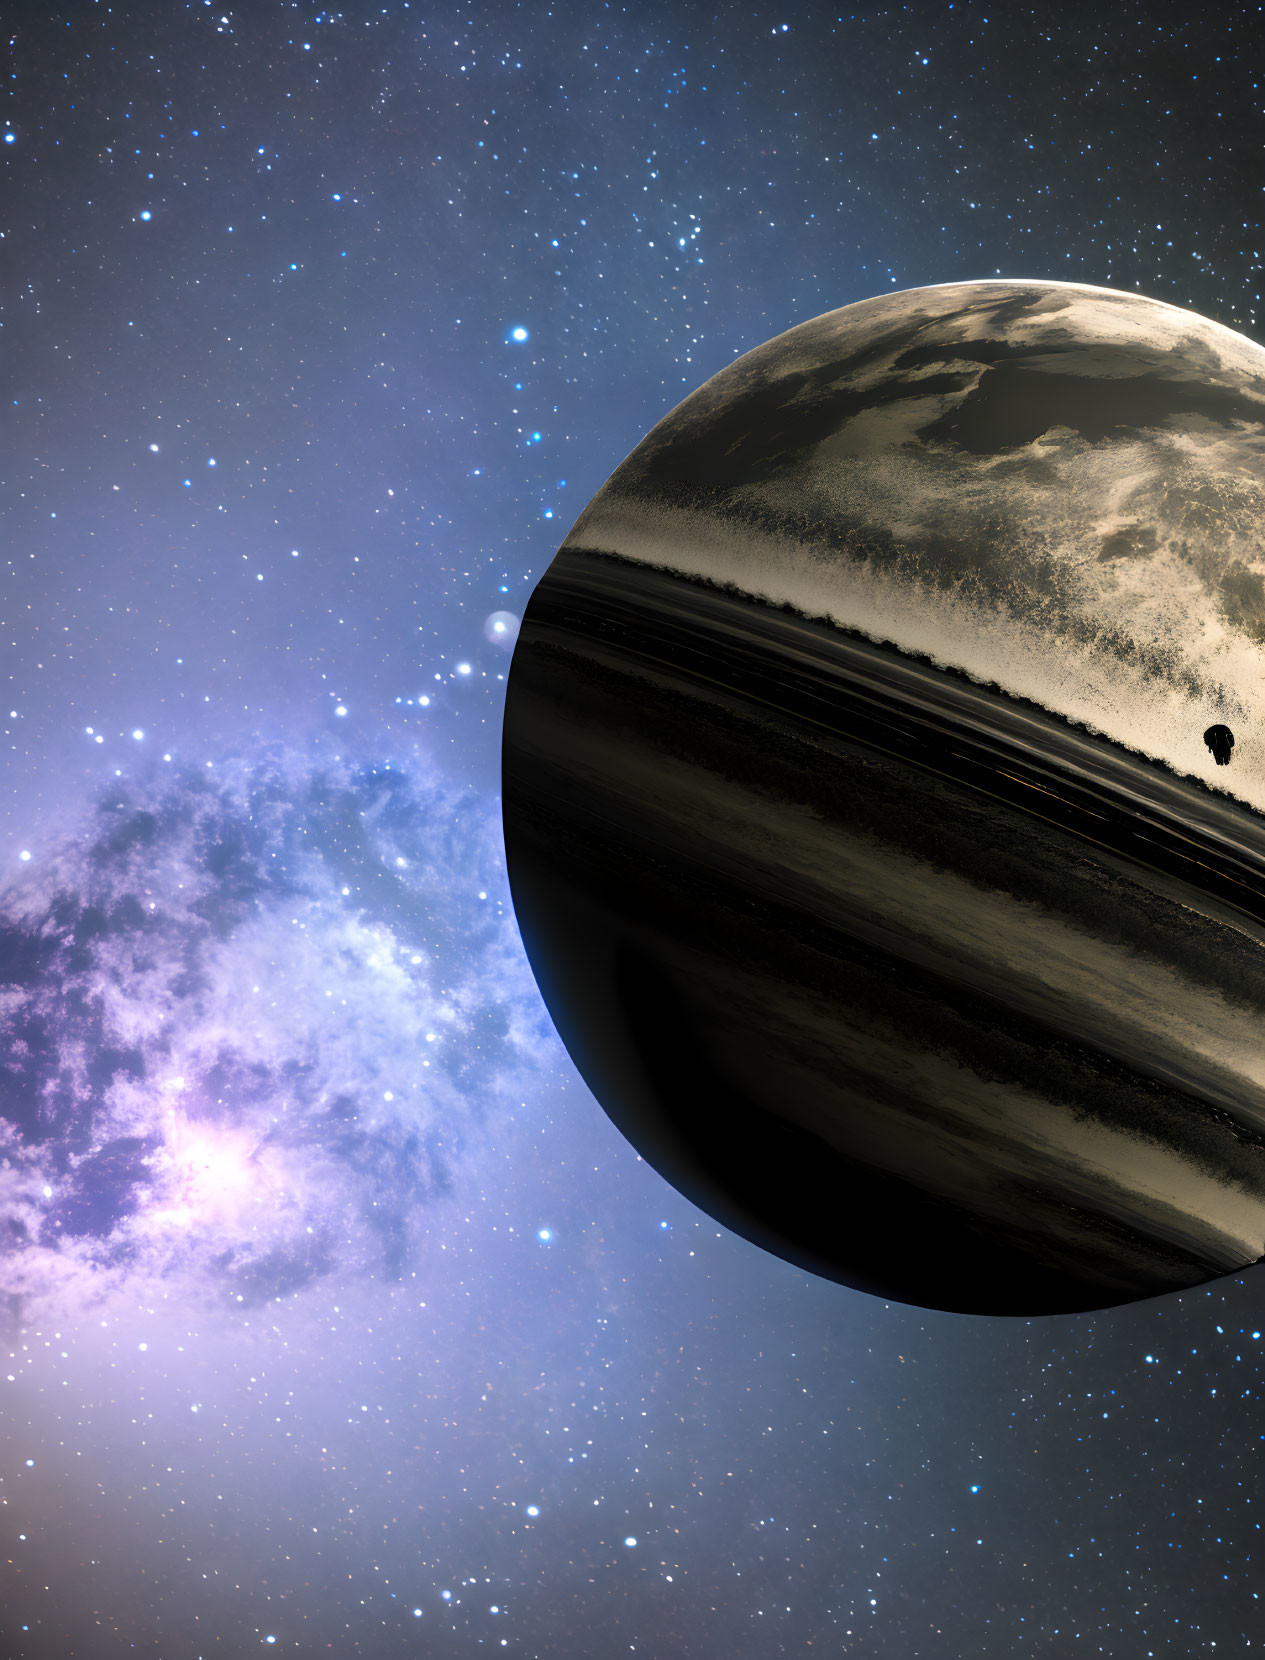 Detailed gas giant planet in celestial scene against starry background